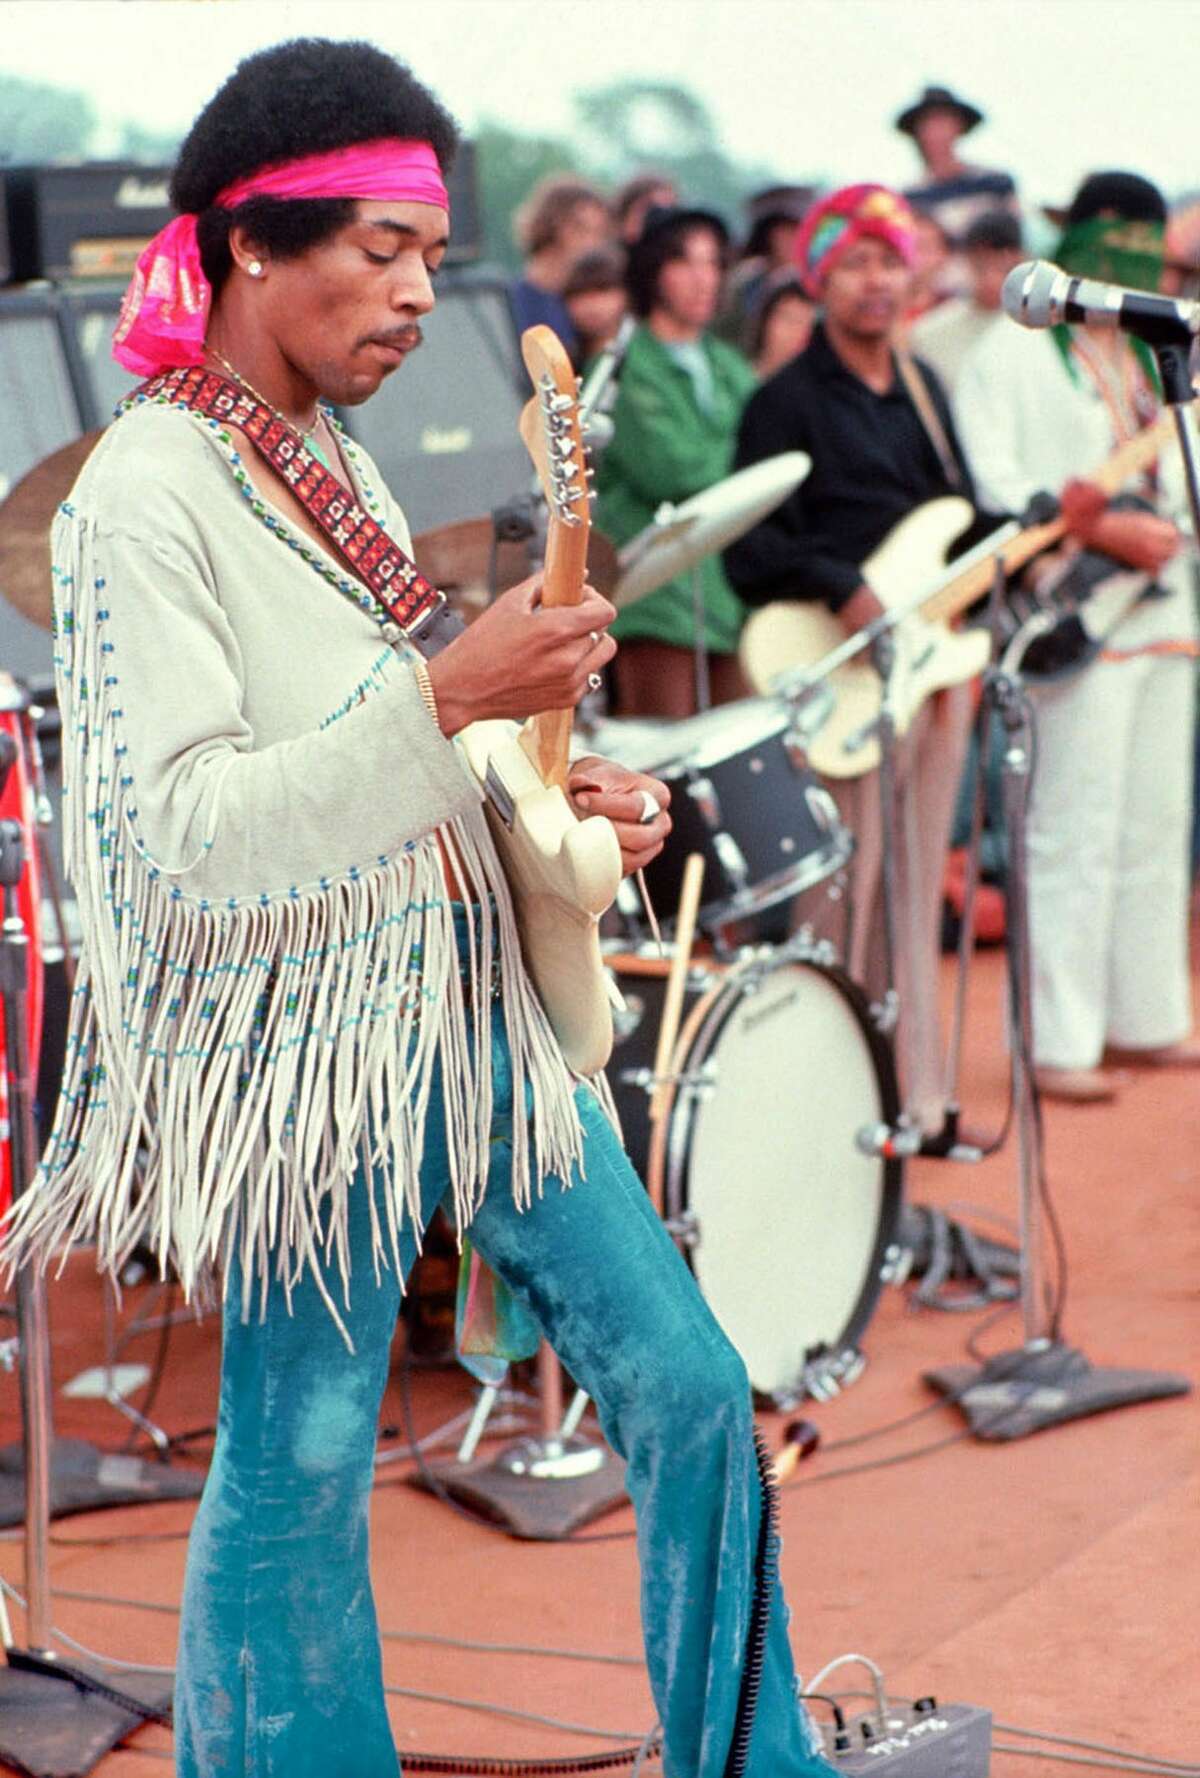 (FILES) This handout file photo by Henry Diltz shows musician Jimi Hendrix playing live at the original Woodstock festival in Bethel, New York on August 15, 1969. Hendrix's relatively short stage career with his band The Experience lasted only four years, but his musical legacy was huge, on September 18, 2010 people the world over are preparing to mark the fortieth anniversary of the death of the guitar hero who died on September 18, 2010 in london hotel room after choking on his own vomit after a lethal cocktail of Red wine and sleeping pills. AFP PHOTO/HENRY DILTZ/MORRISON HOTEL GALLERY/NEWSCOM/HO ++RESTRICTED TO EDITORIAL USE++ (Photo credit should read HENRY DILTZ/AFP/Getty Images)